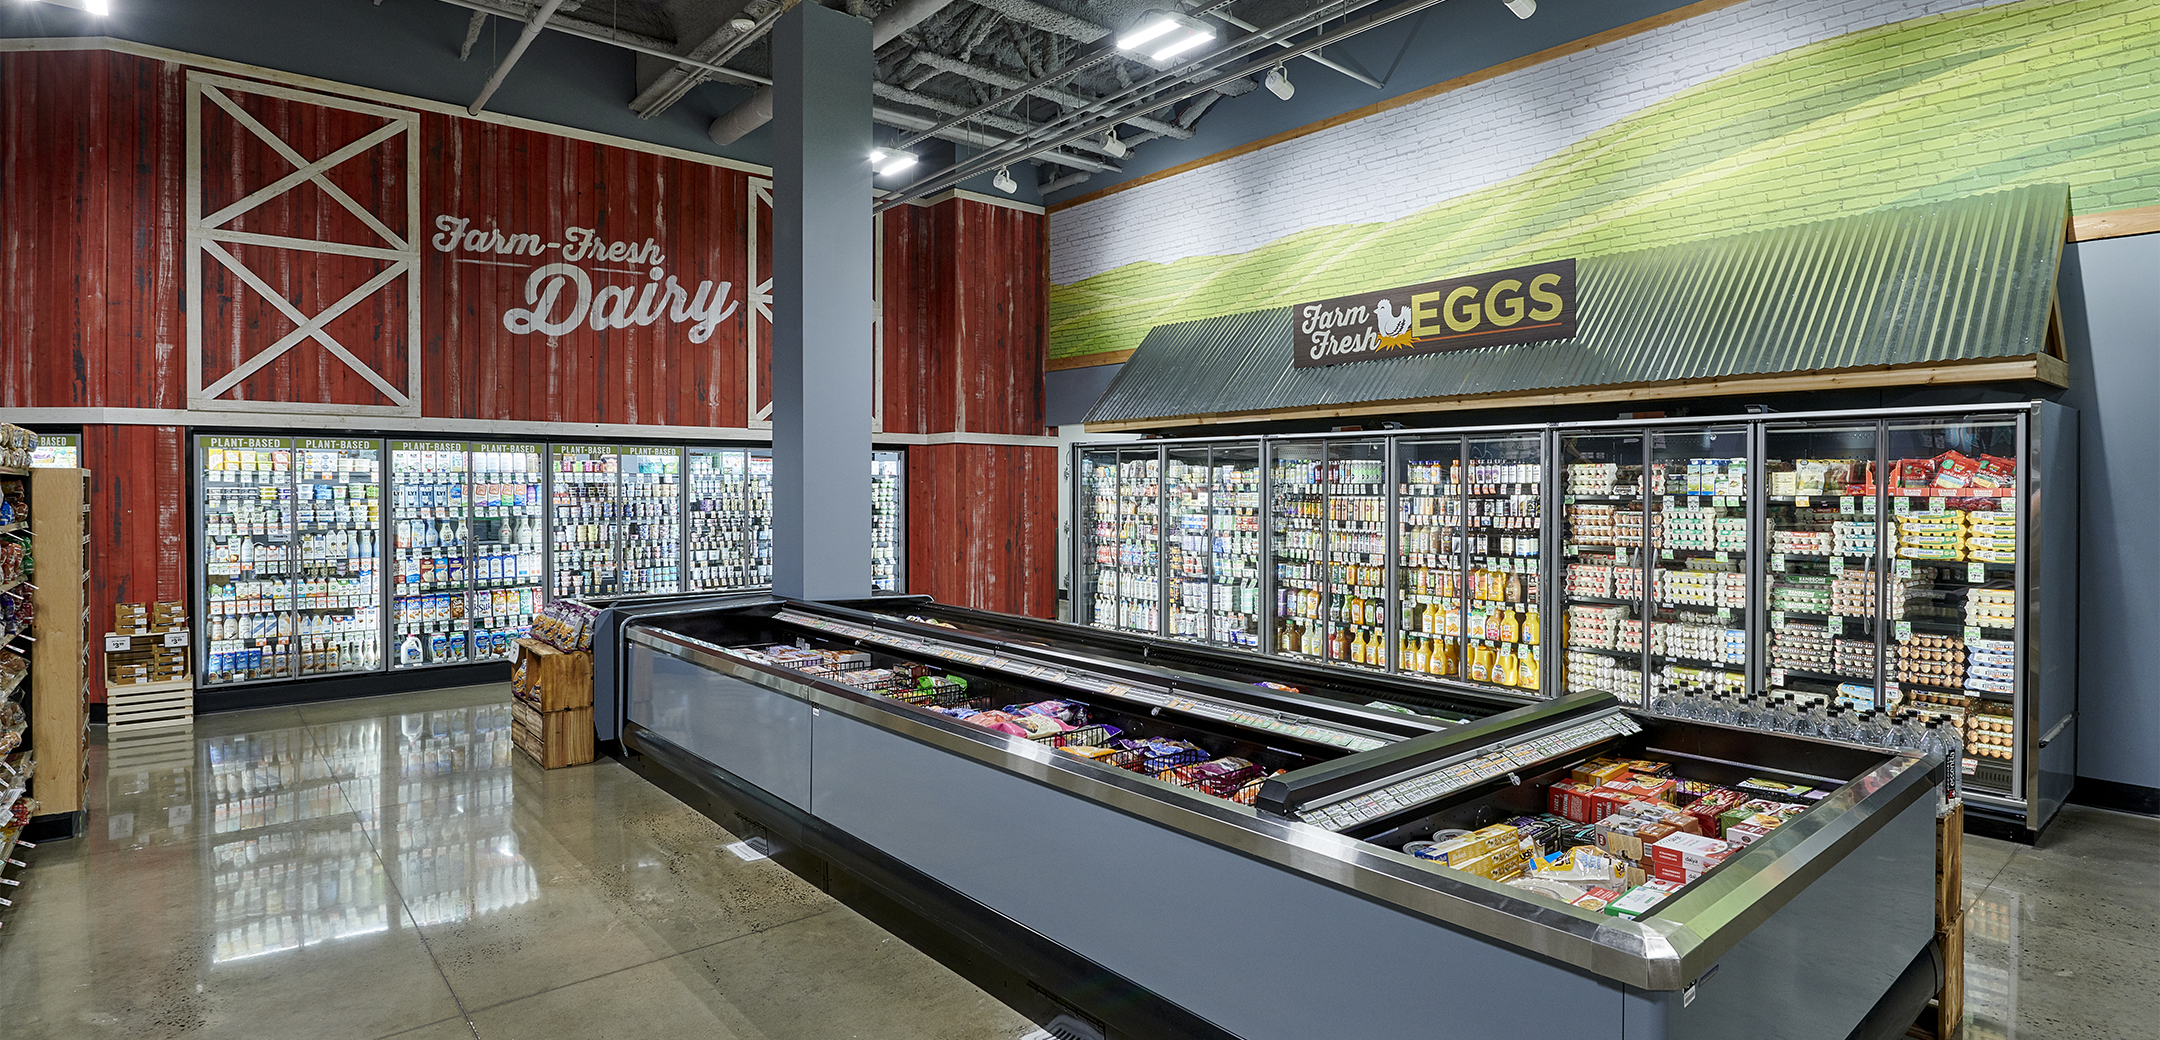 The interior view of the Sprouts Farmers Market showcasing the corner barn and field painted design highlighting the dairy and egg section.